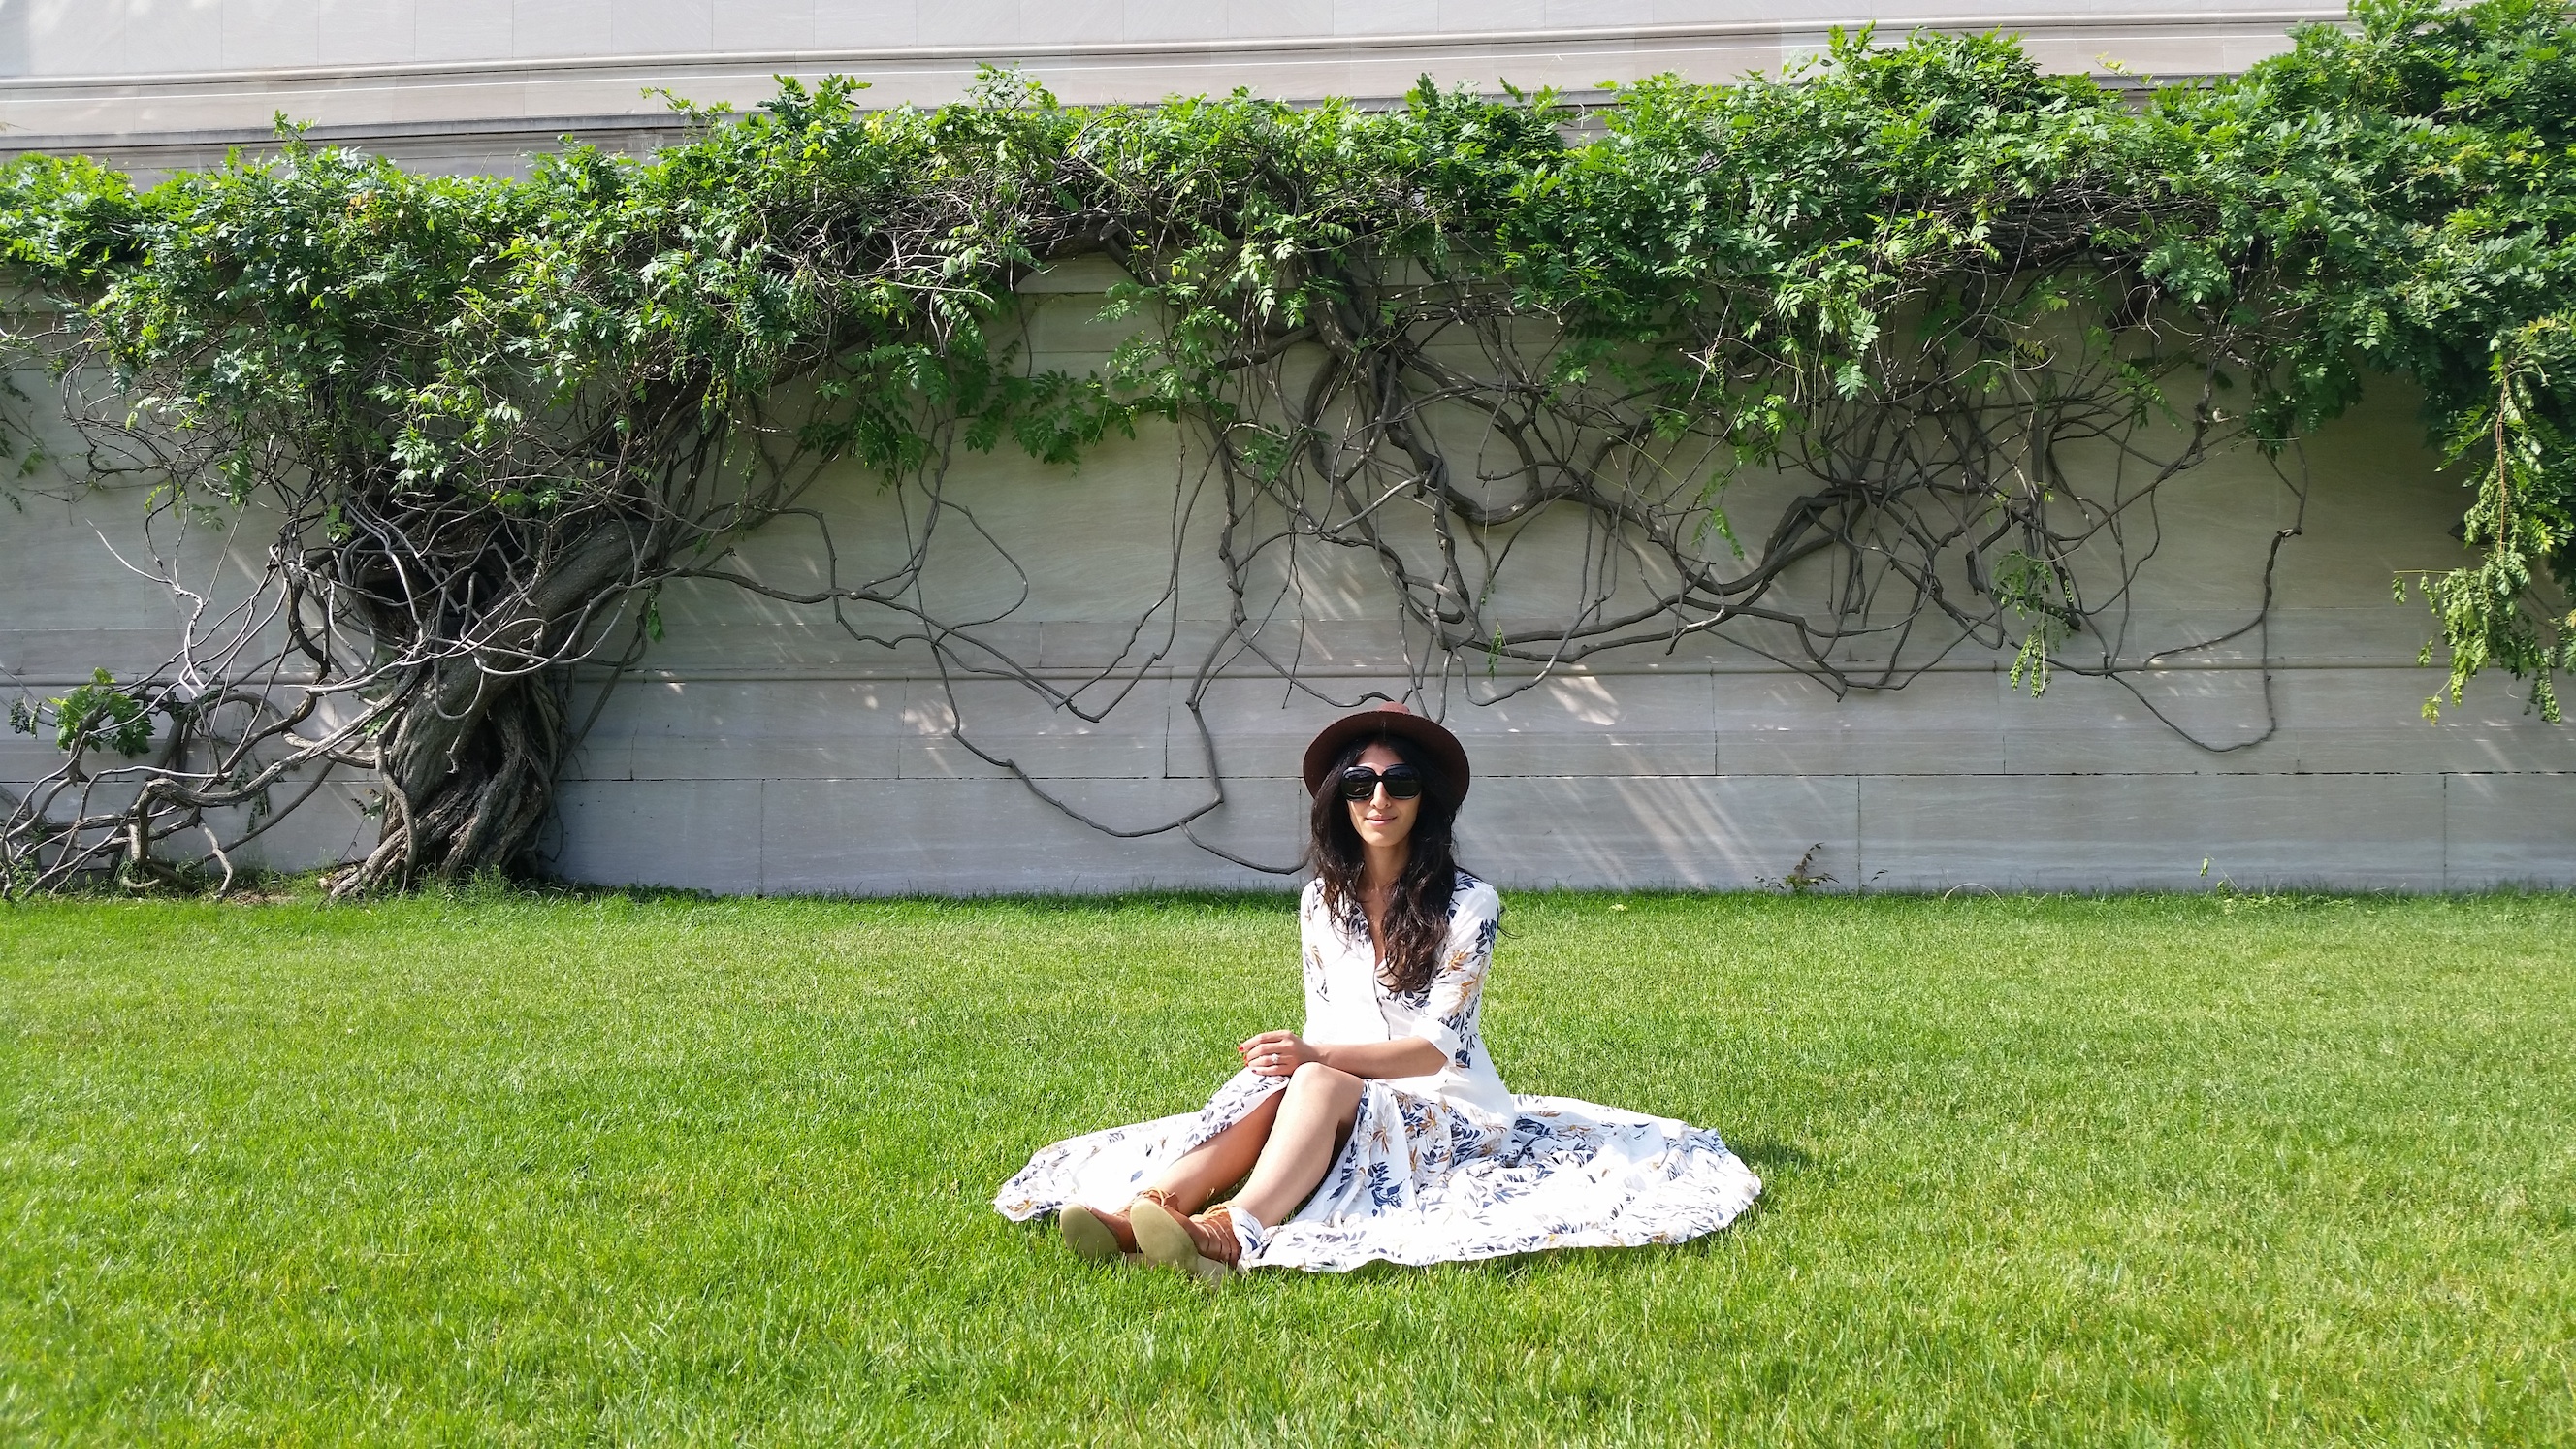 This Free People maxi with the supersized skirt also functions flawlessly as a picnic blanket :)